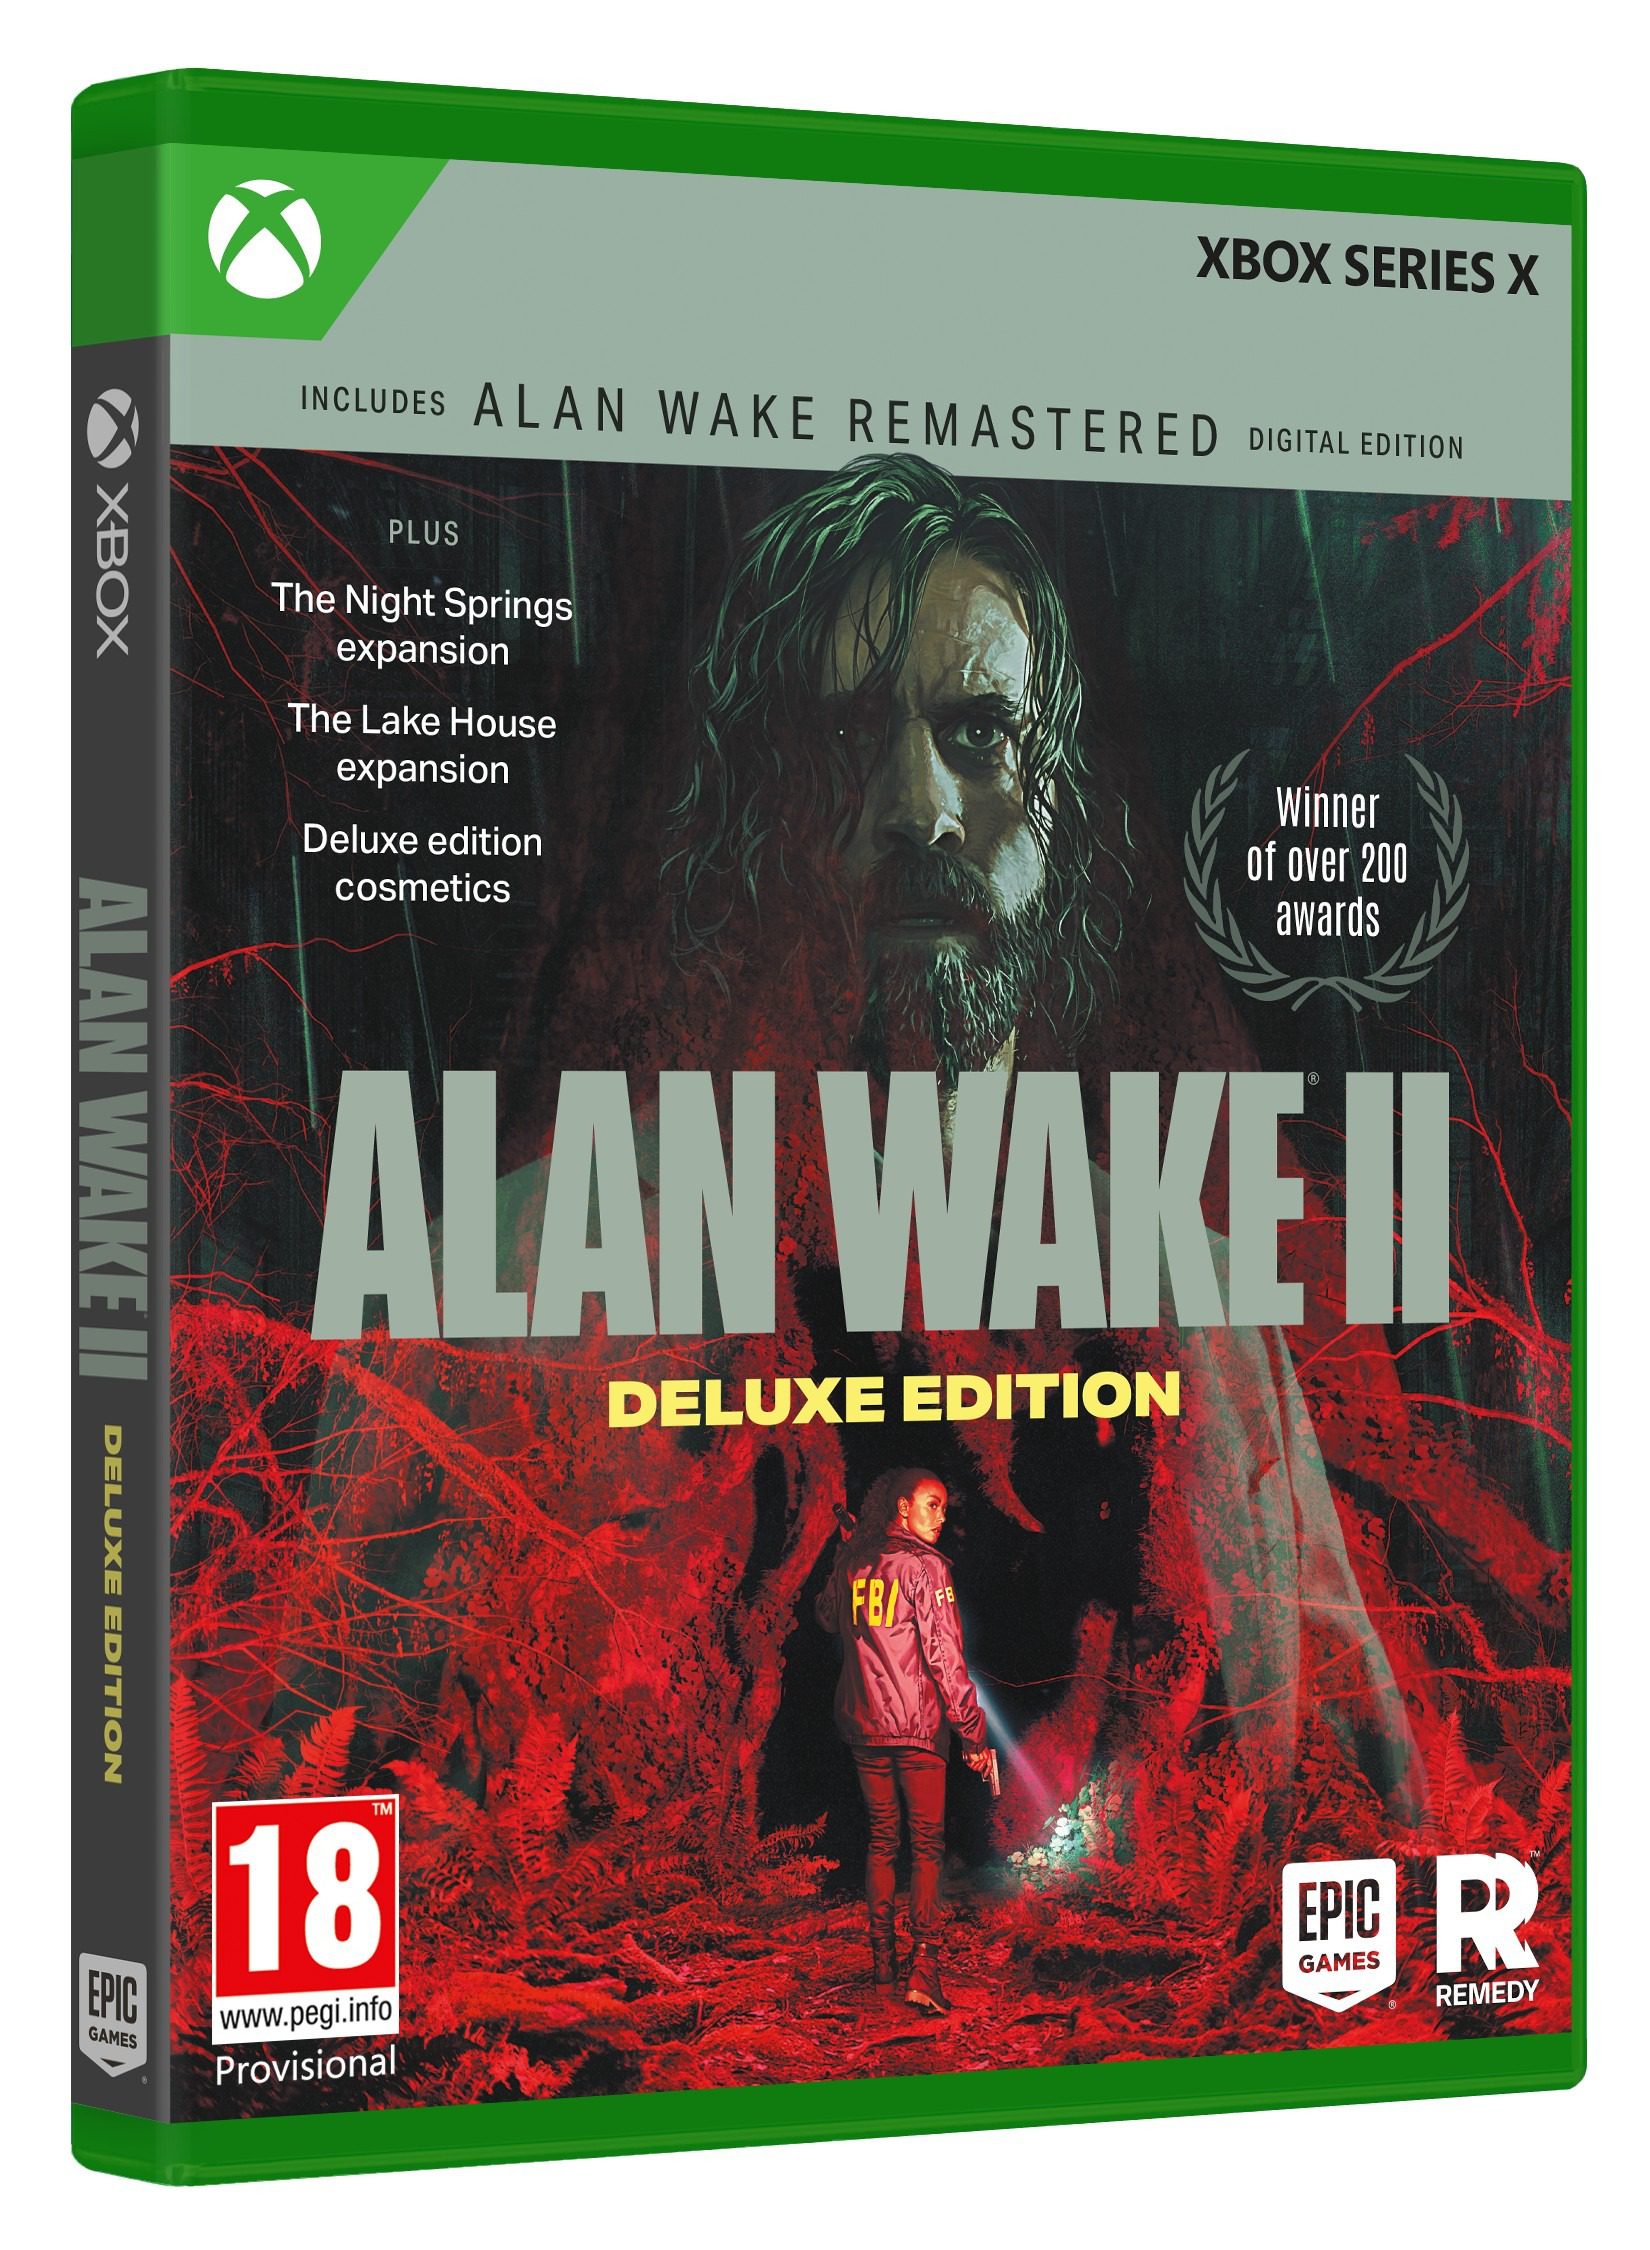 Alan Wake 2 - Deluxe Edition Xbox Series X Front Cover